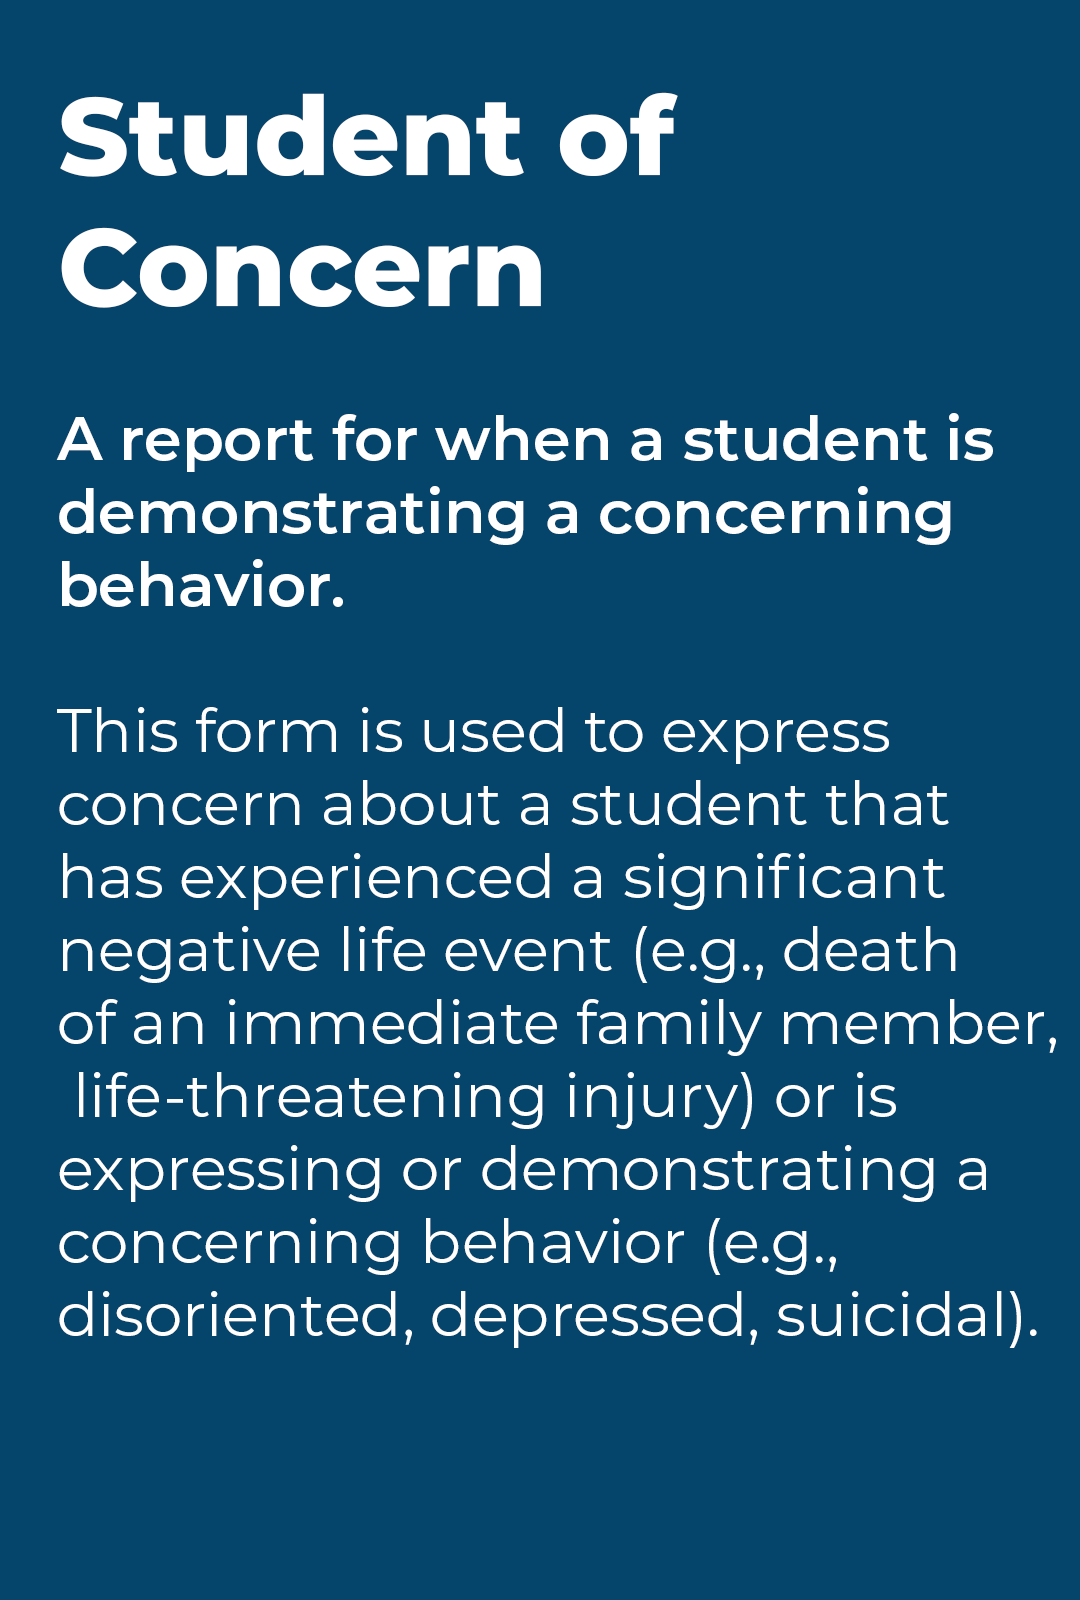 Link to Student of Concern Form